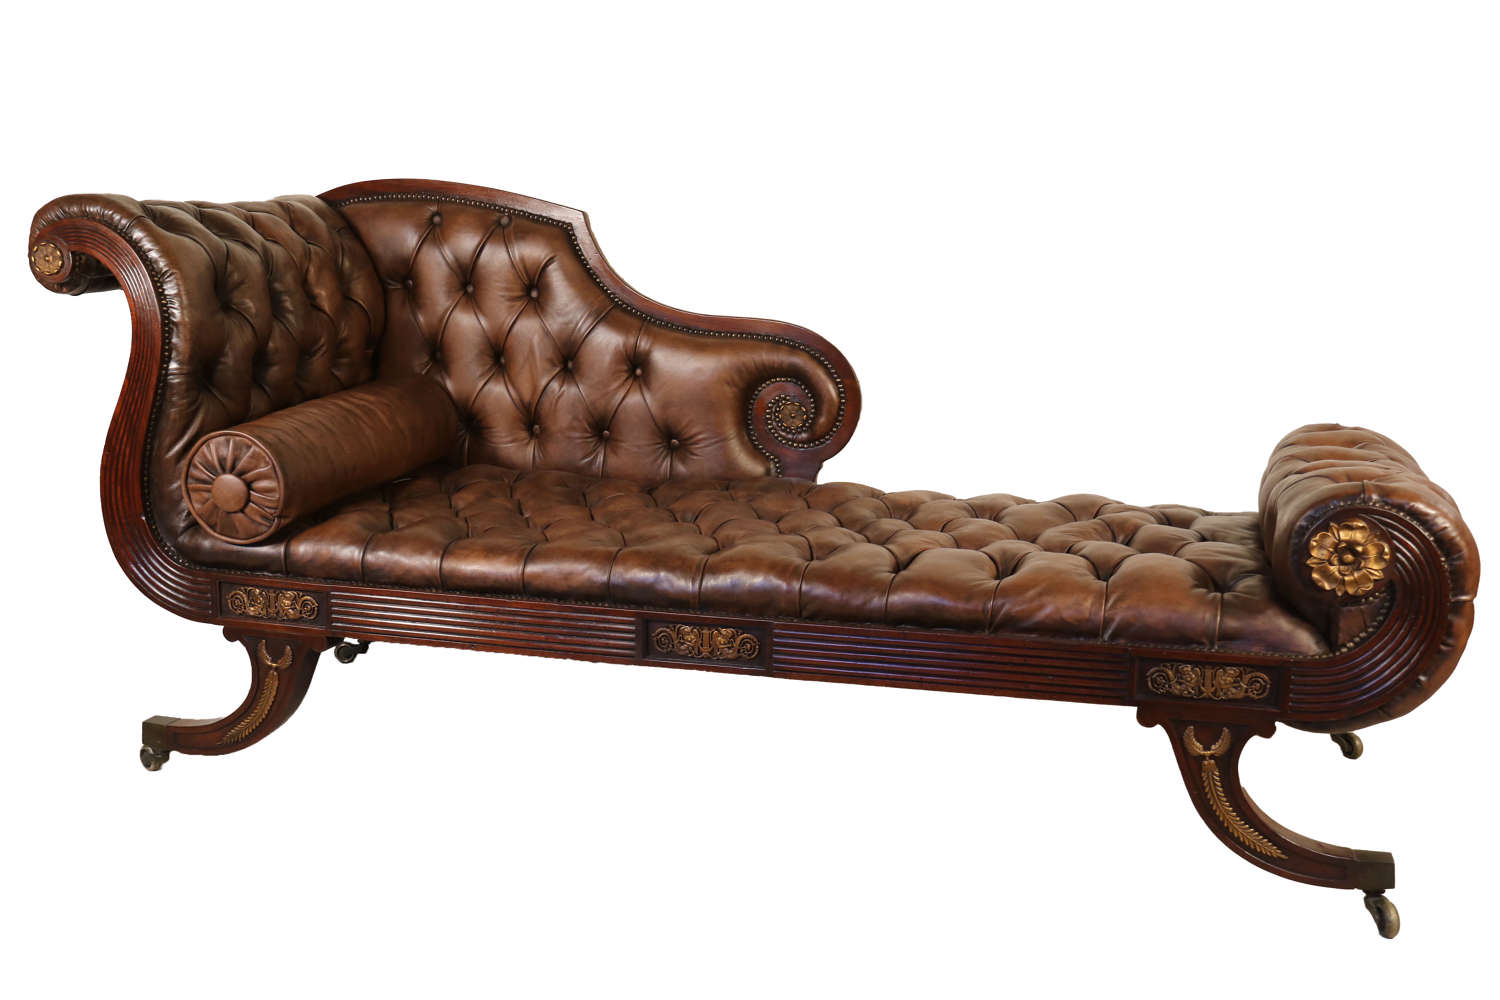 Antique Regency mahogany leather upholstered chaise lounge circa 1810